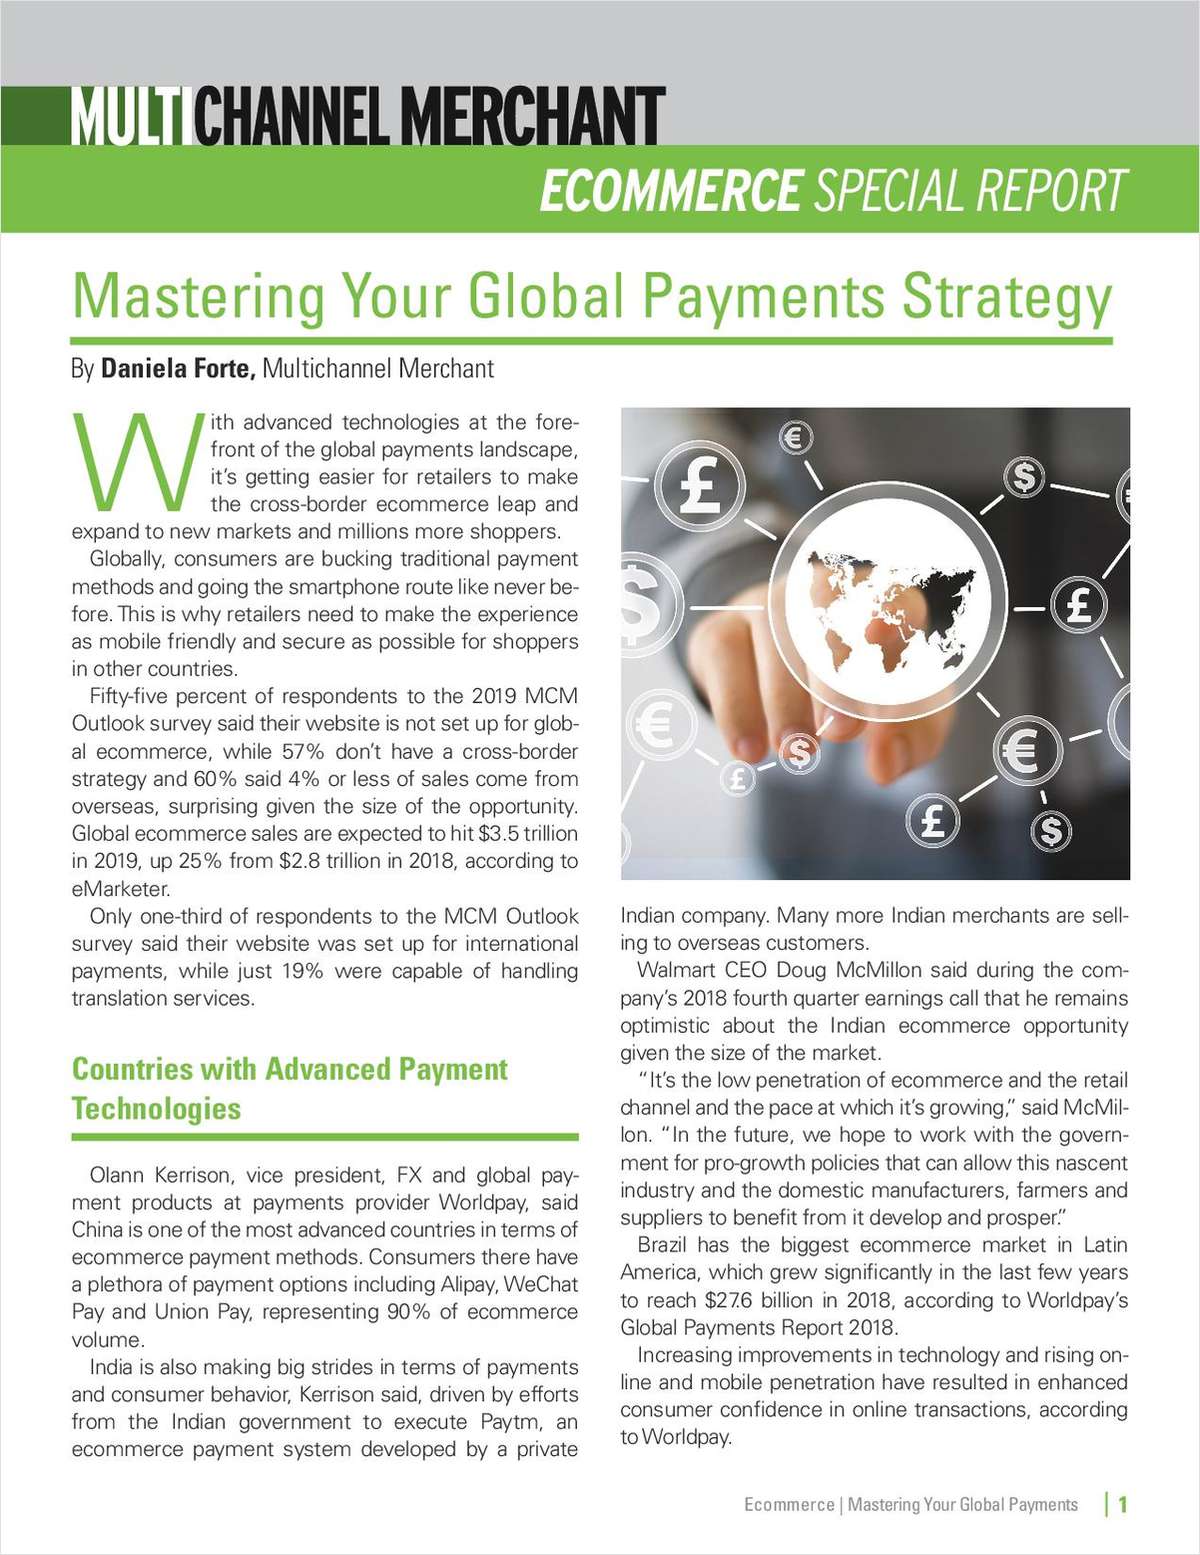 How to Master Your Global Payments Strategy